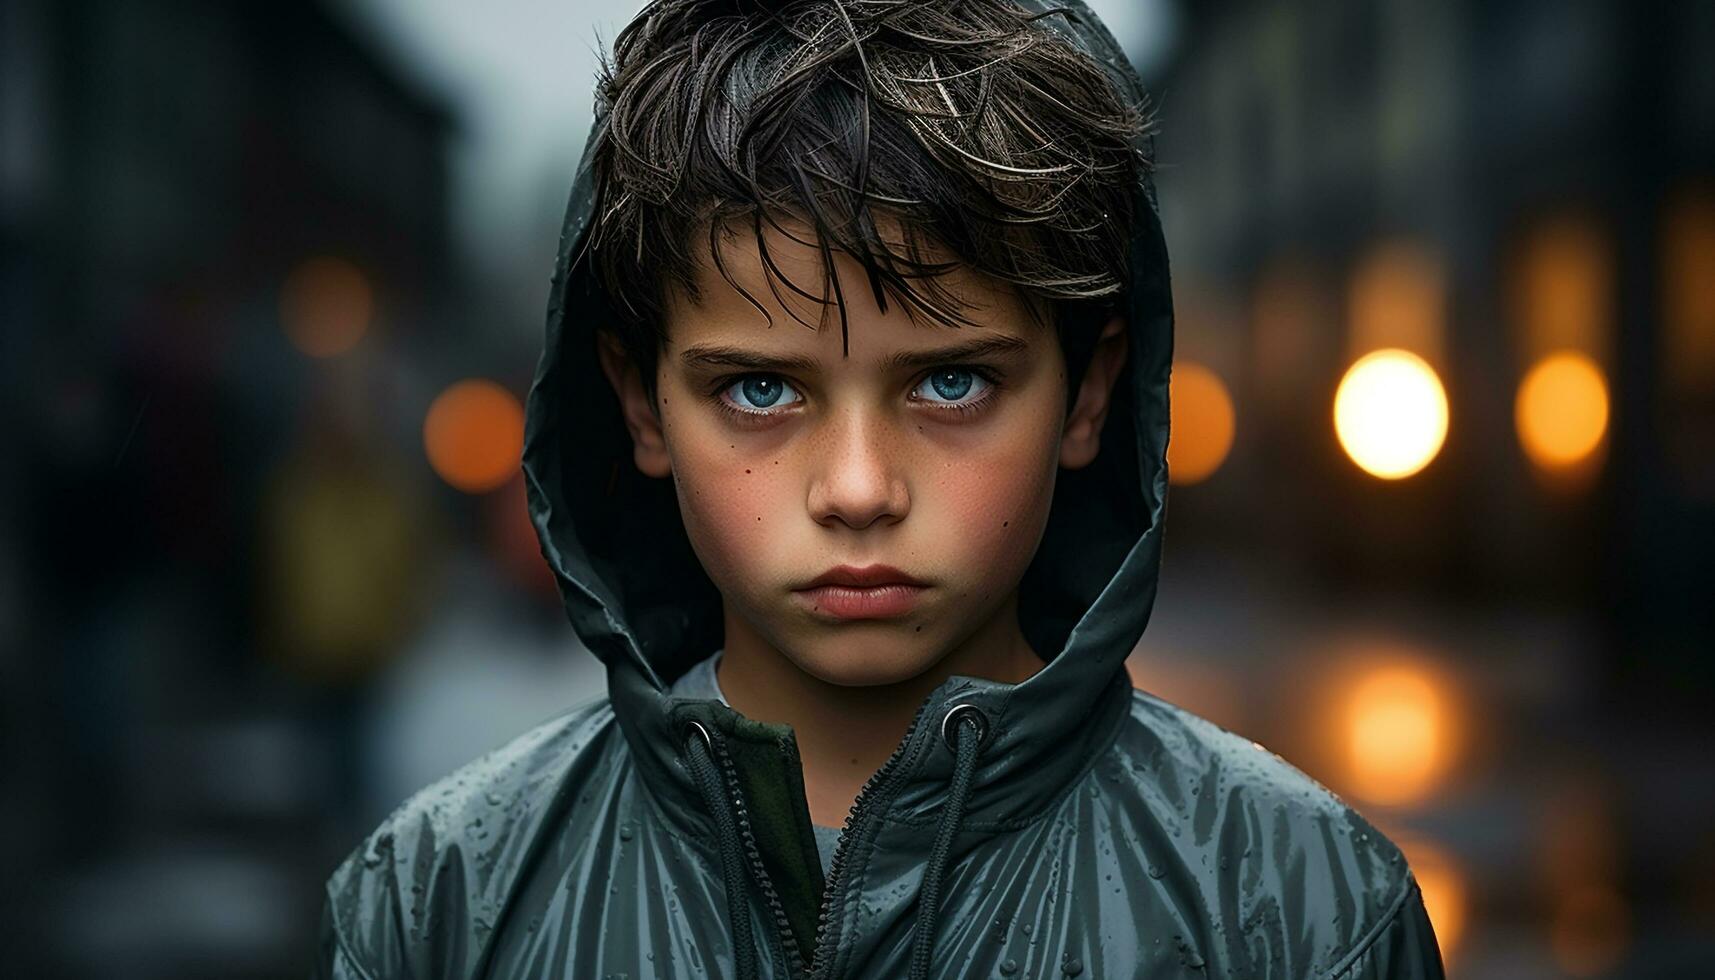 One sad boy in the rain, looking at the camera generated by AI photo